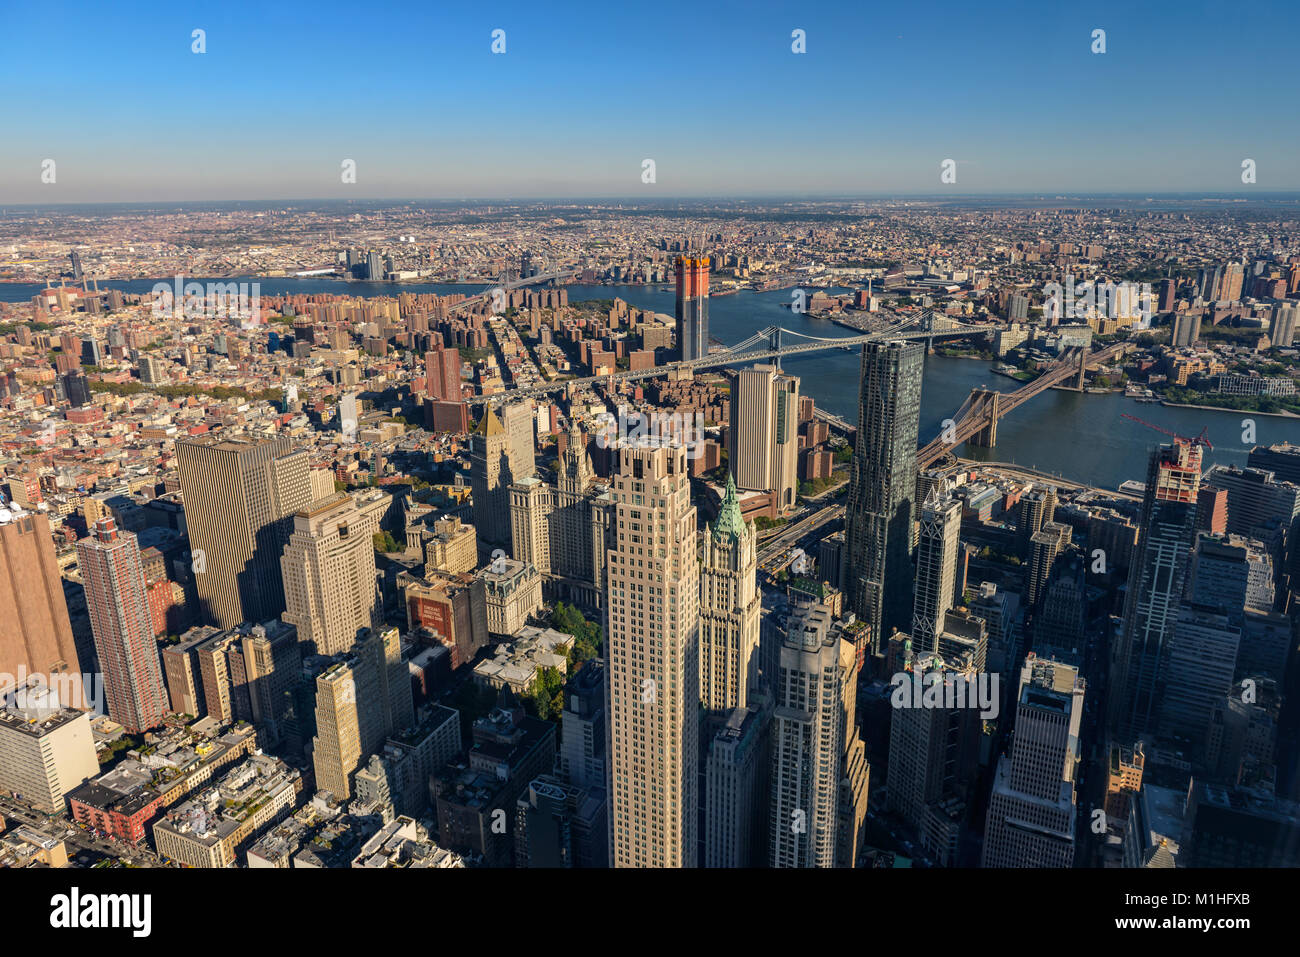 Aerial view of Skyline with Skyscrapers in Downtown Manhattan and Lower Manhattan, New York City, USA. Stock Photo